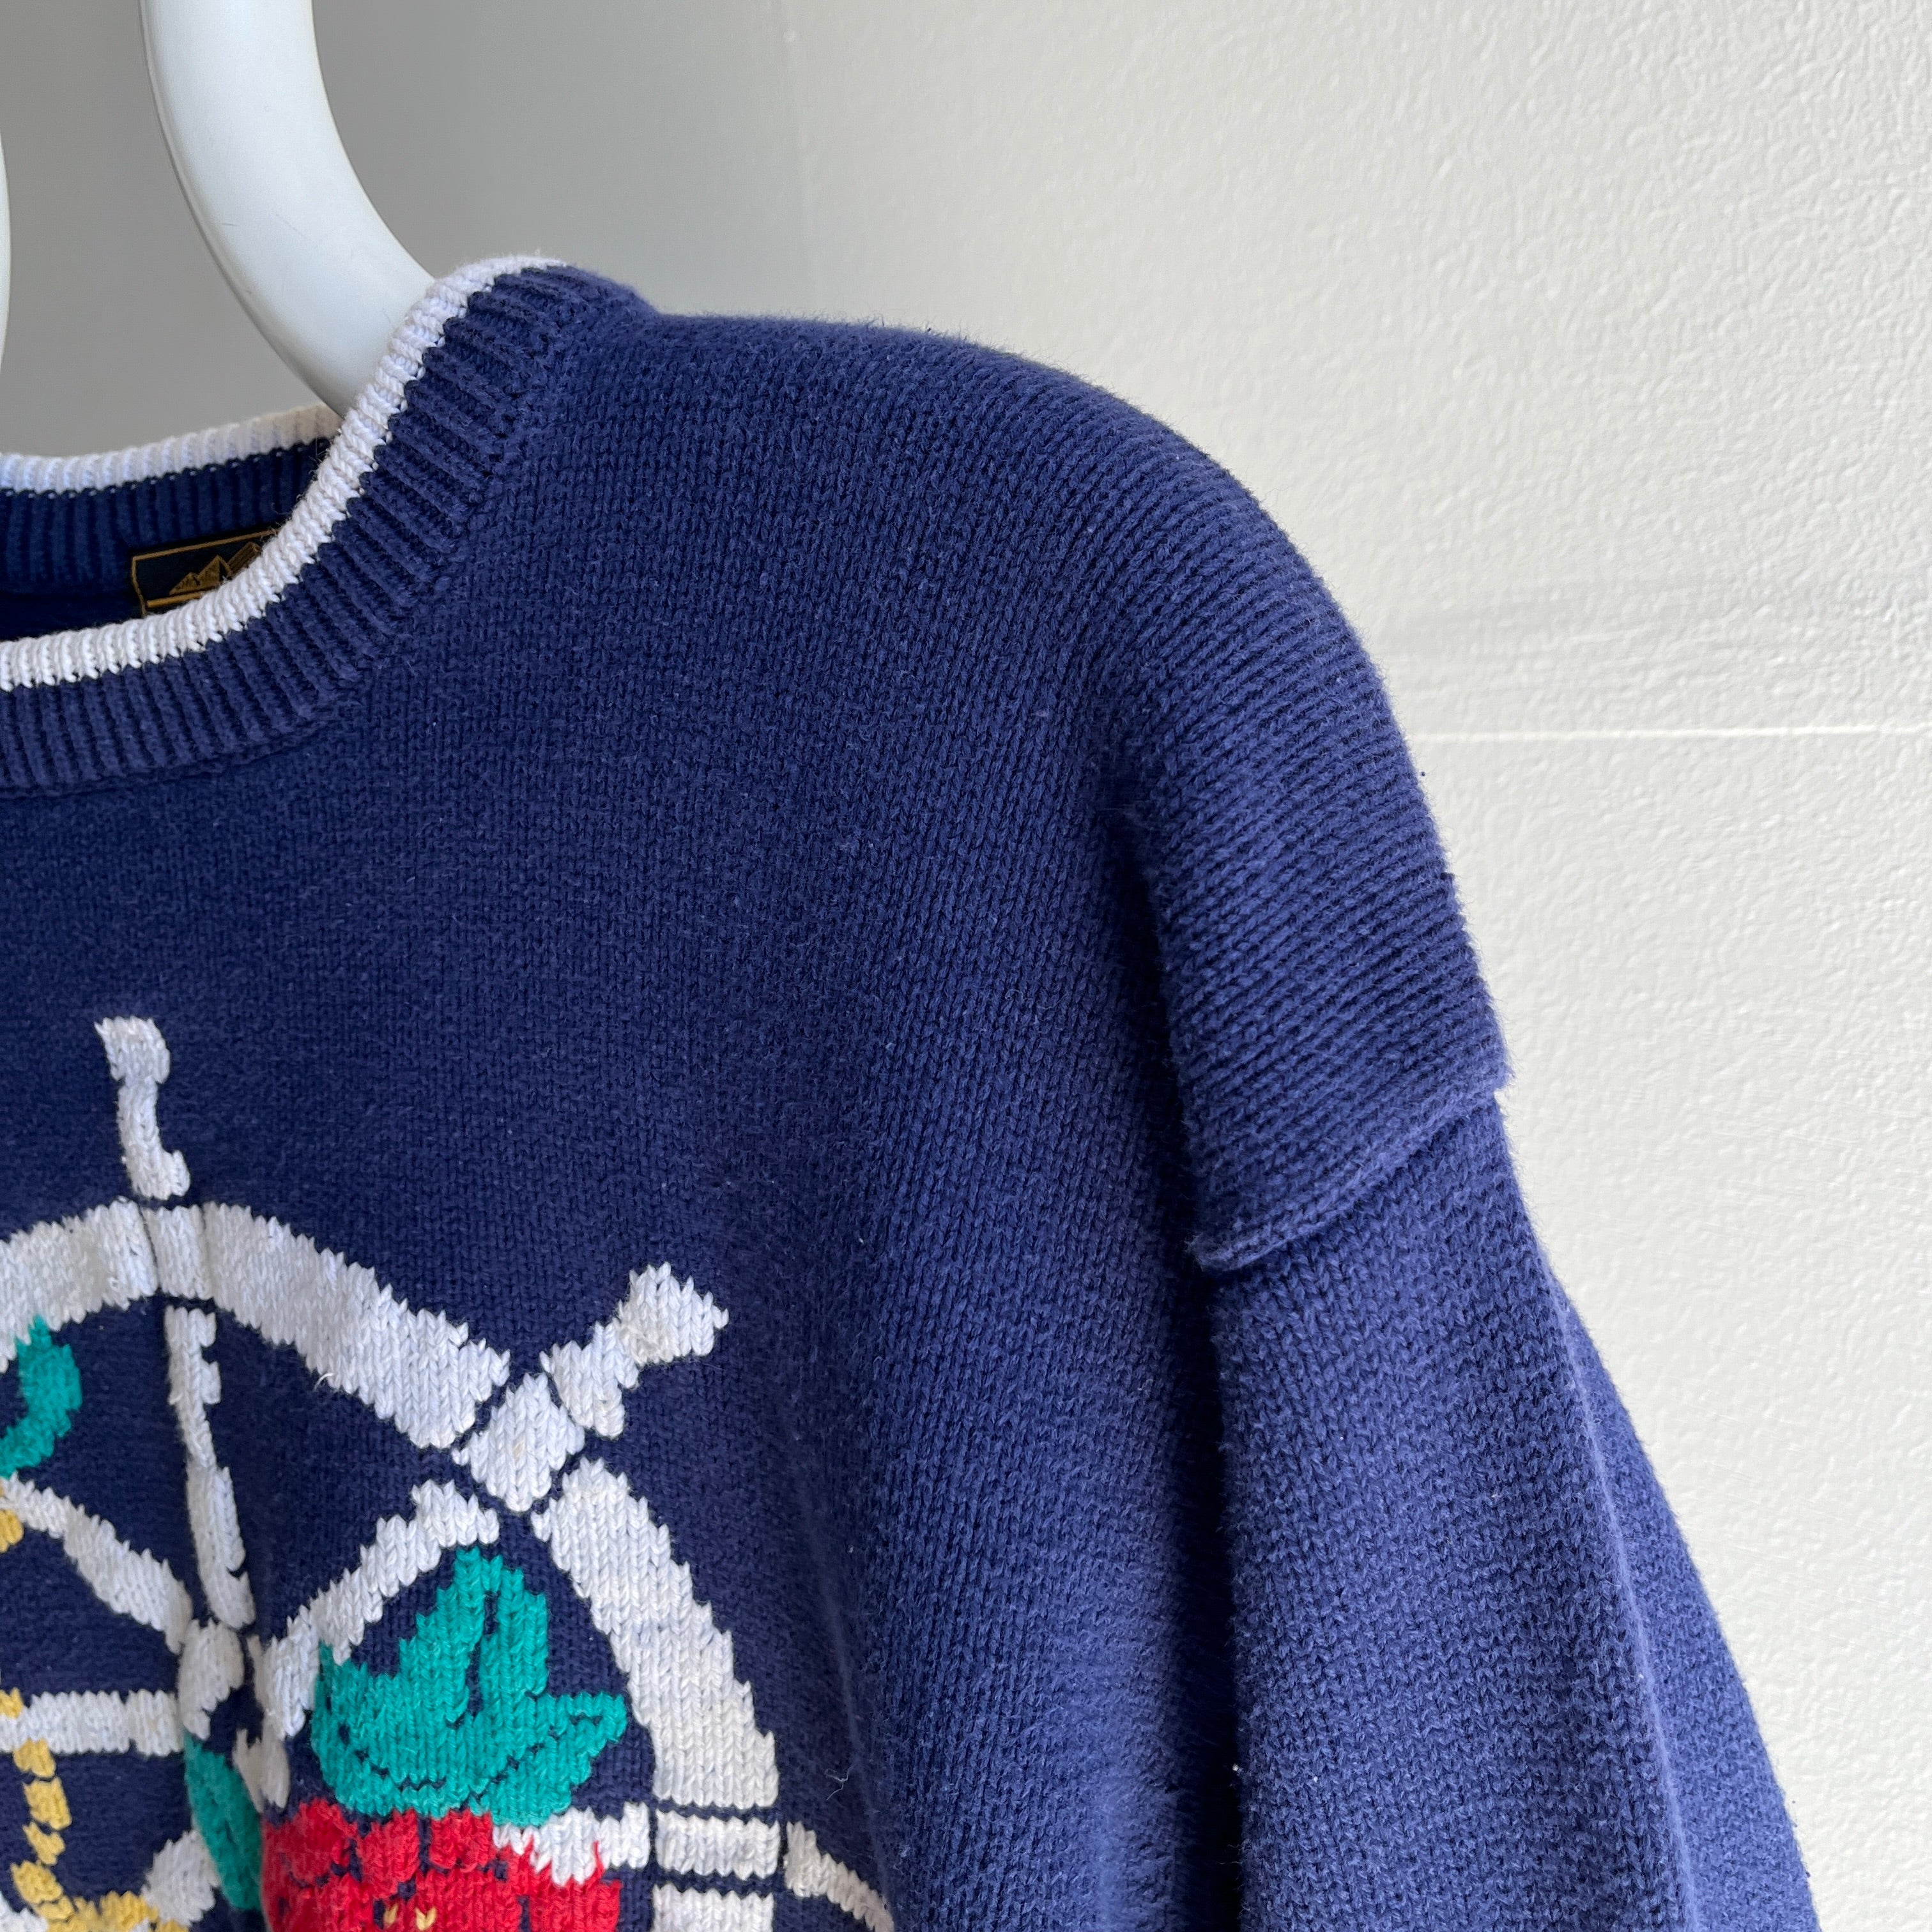 1990s Eddie Bauer Nautical and Floral Cotton Knit Sweater